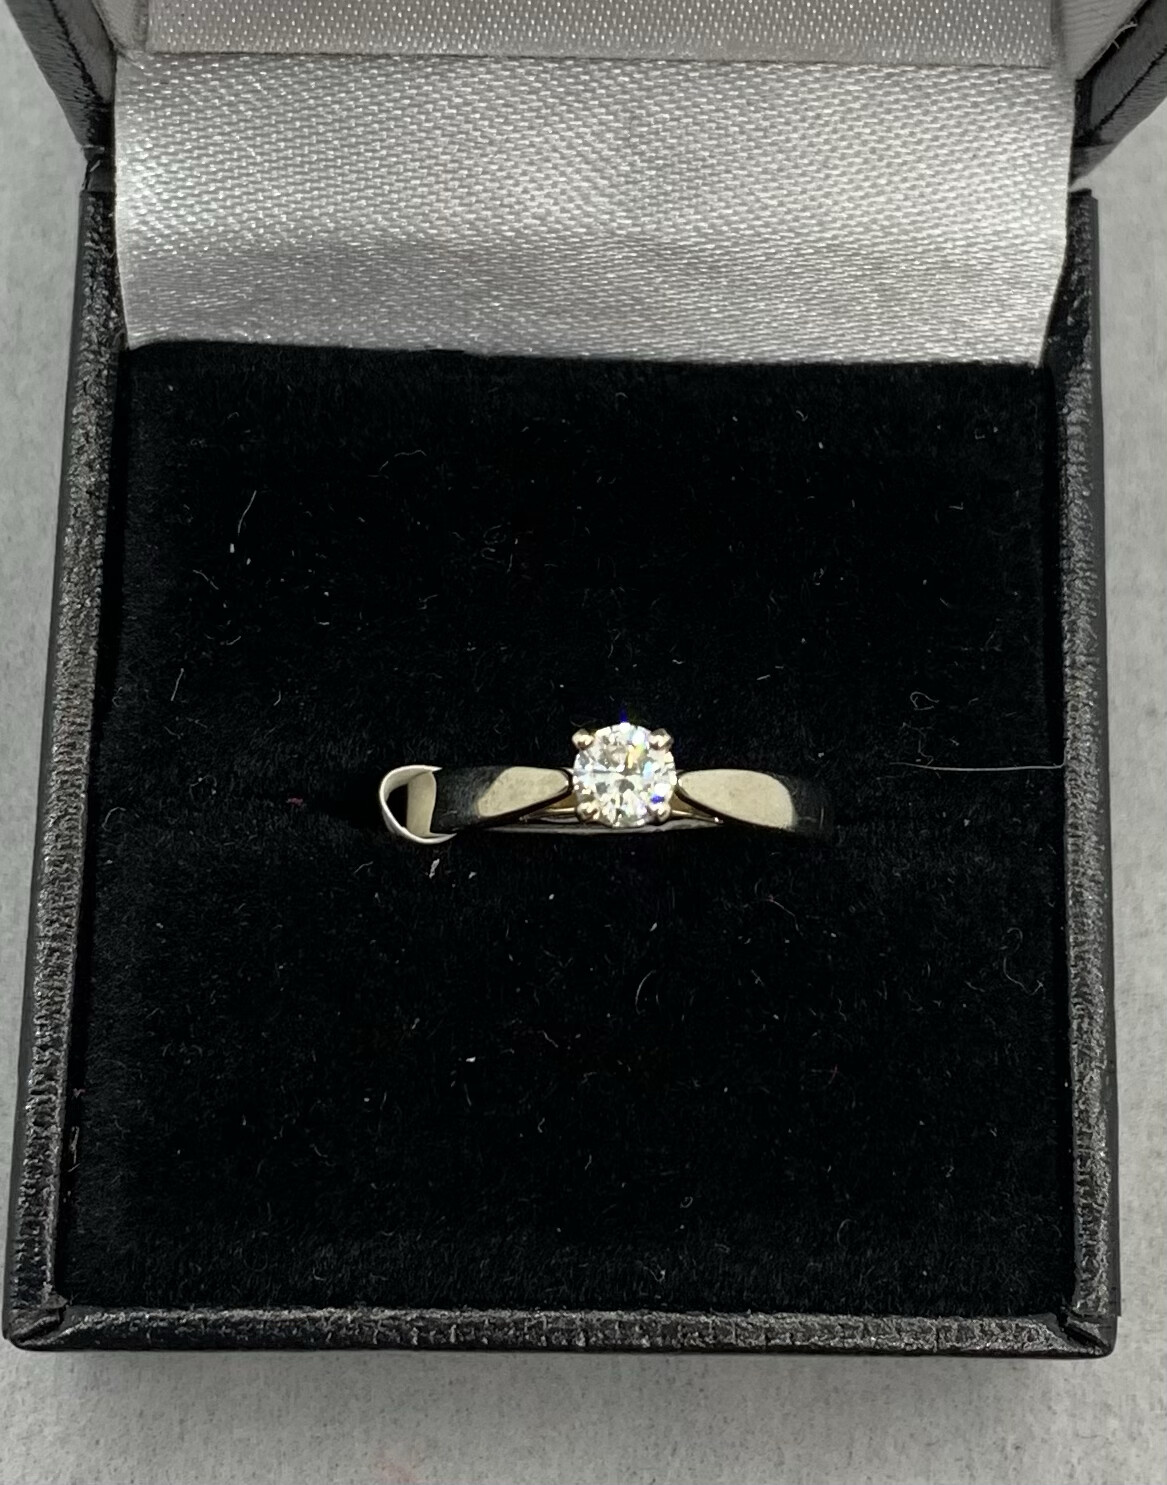 Diamond Engagement Ring, 25pts. Round Brilliant Cut in a 14Kt, White Gold, Cathedral Mounting